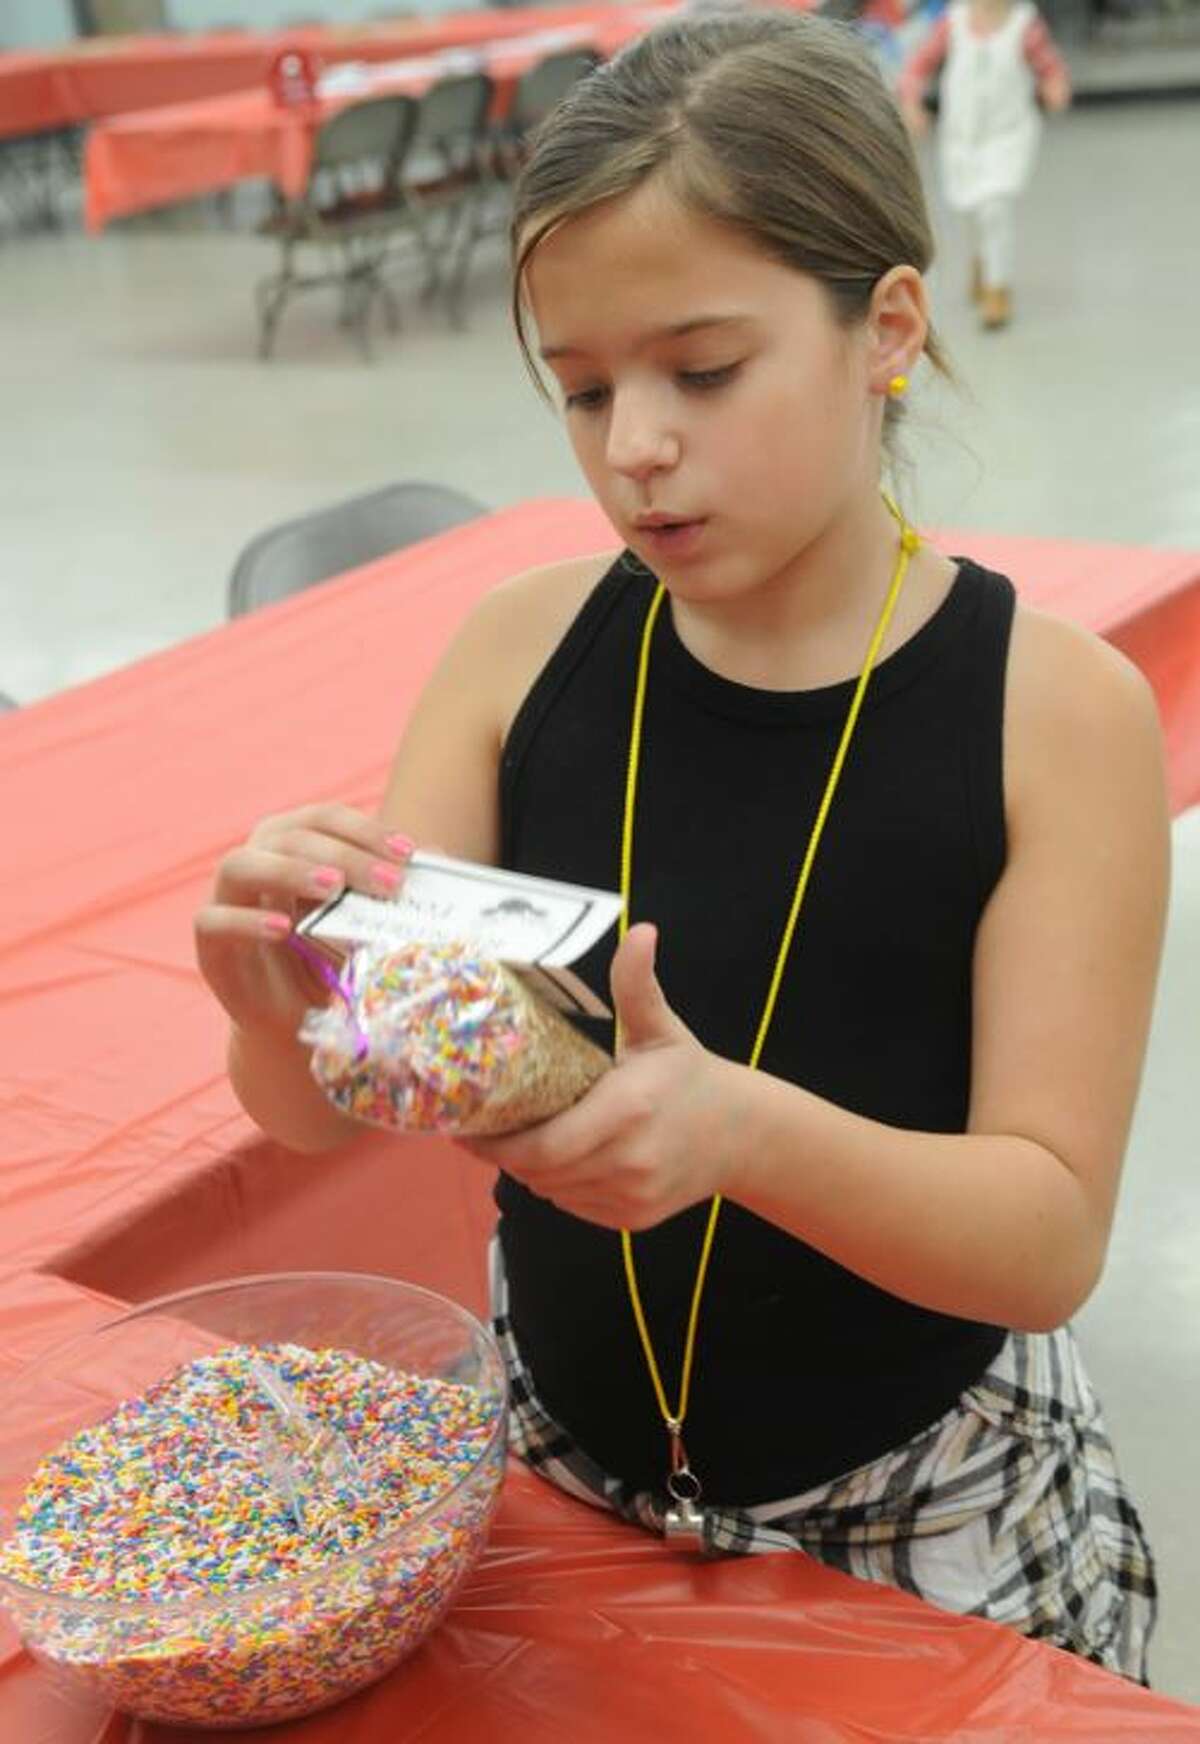 Reagan Guswelle of Edwardsville examines the container of reindeer food she created during Saturday's Epic Santa Day event in Worden.